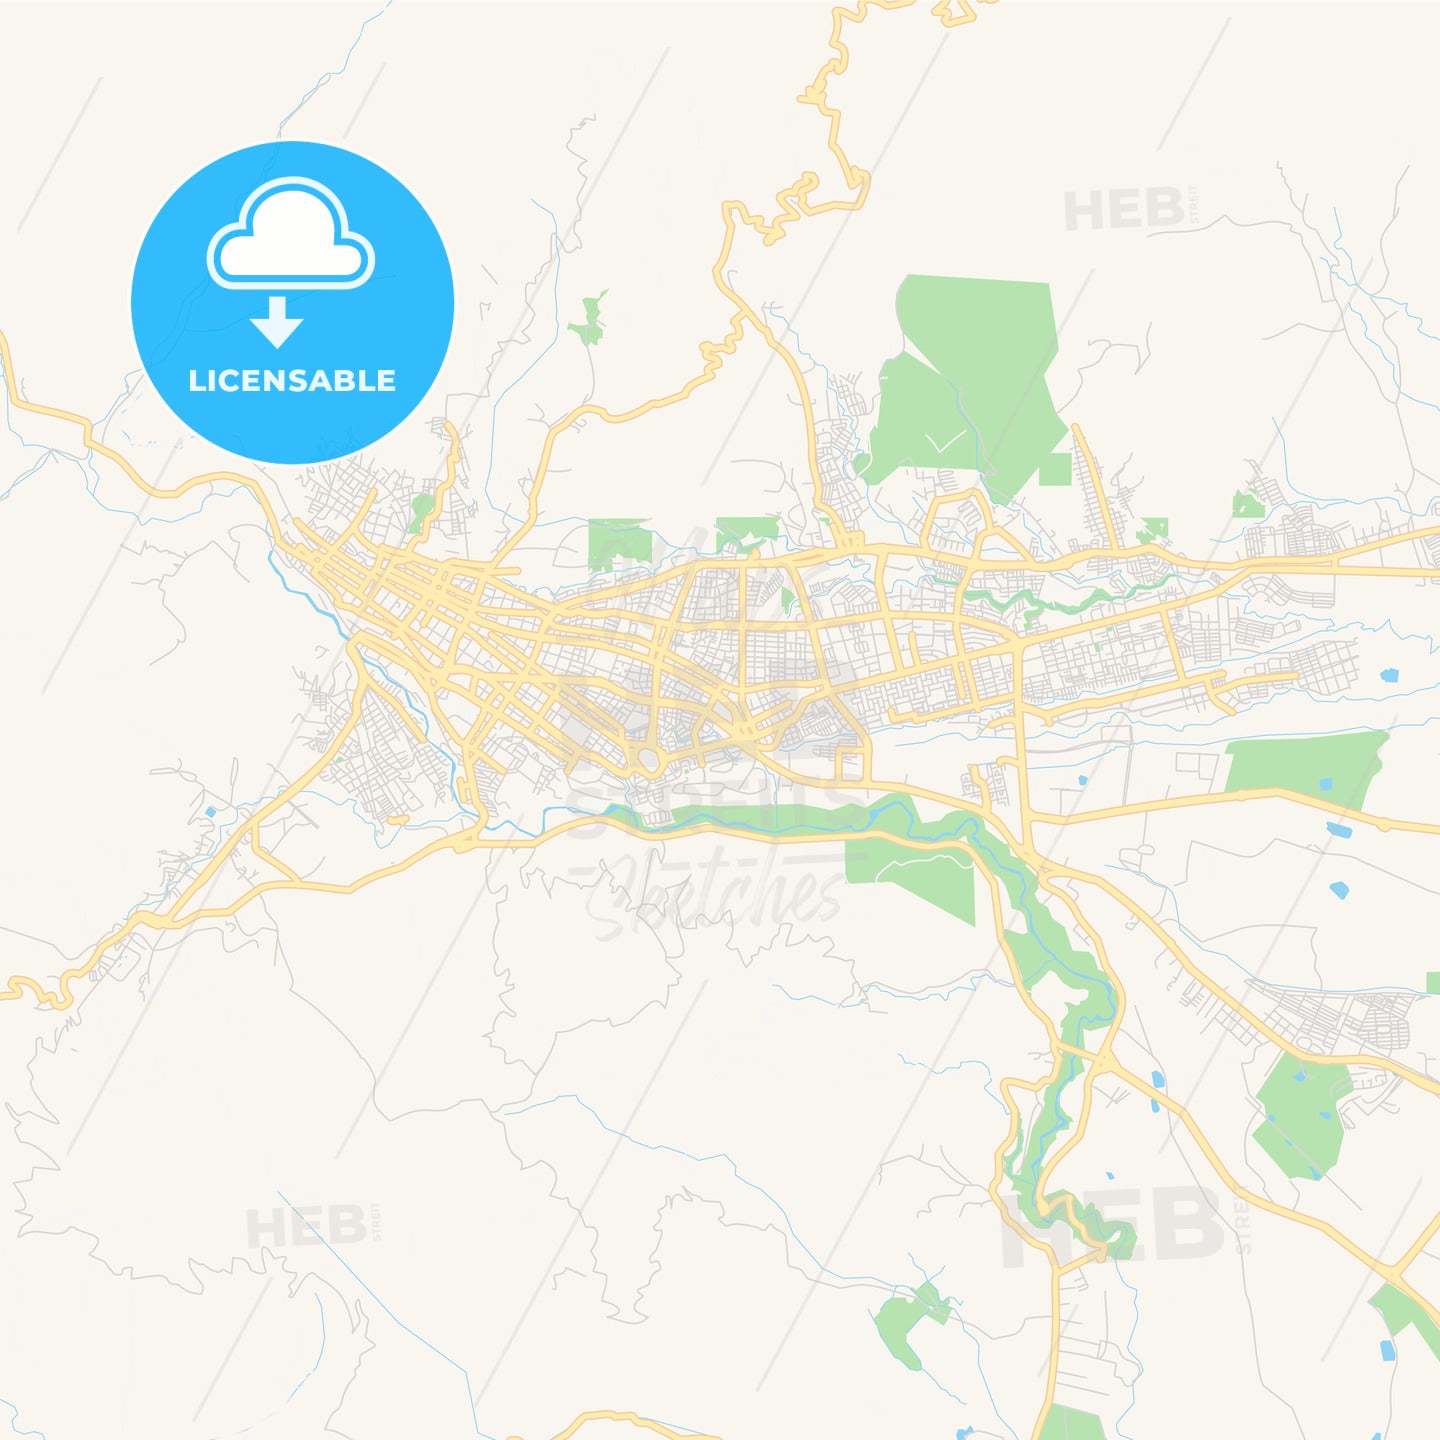 Printable street map of Ibague, Colombia